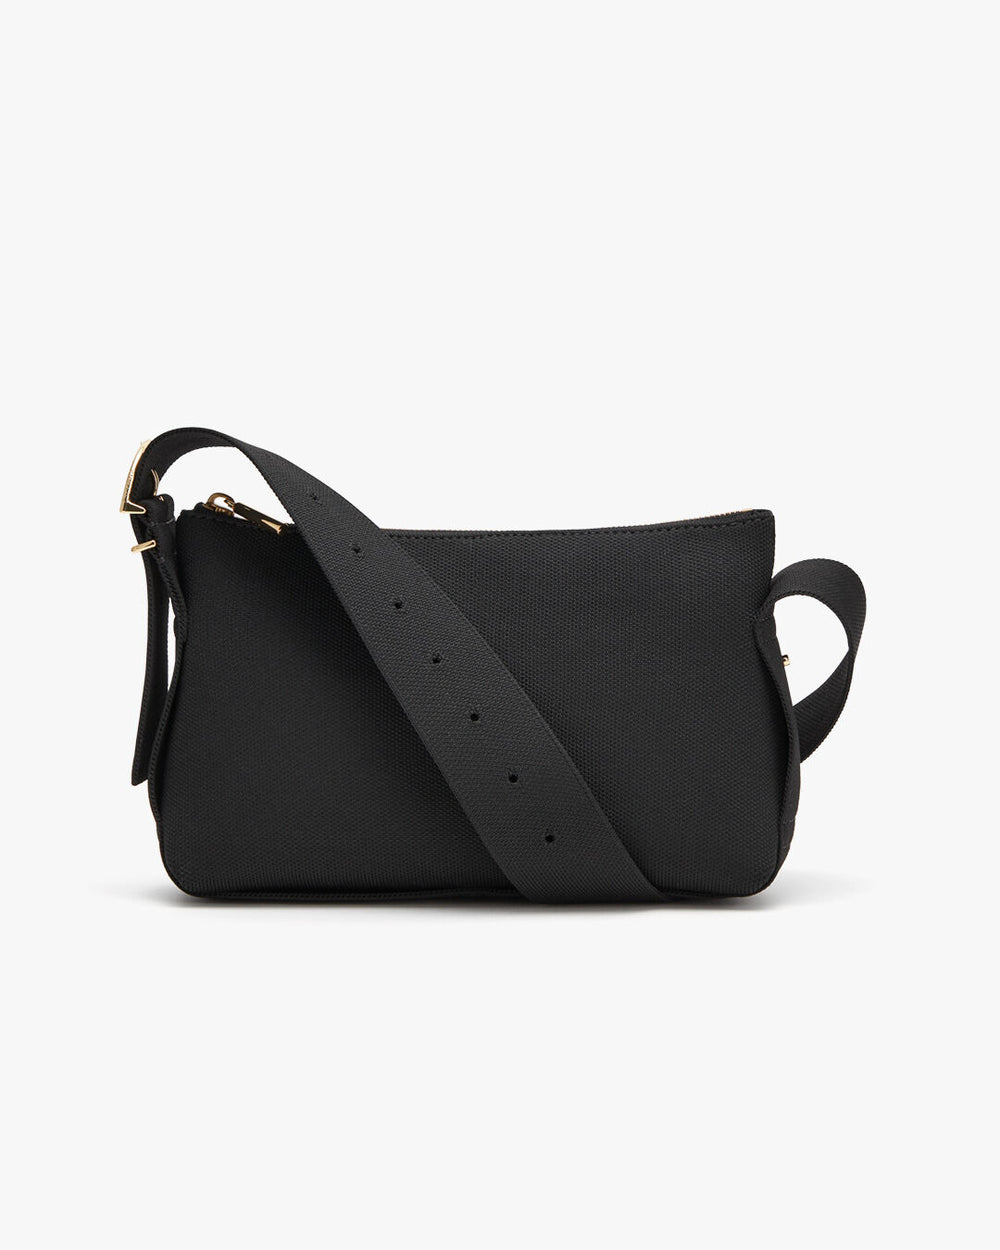 Cuyana Double Loops Recommendations and Fit : r/handbags